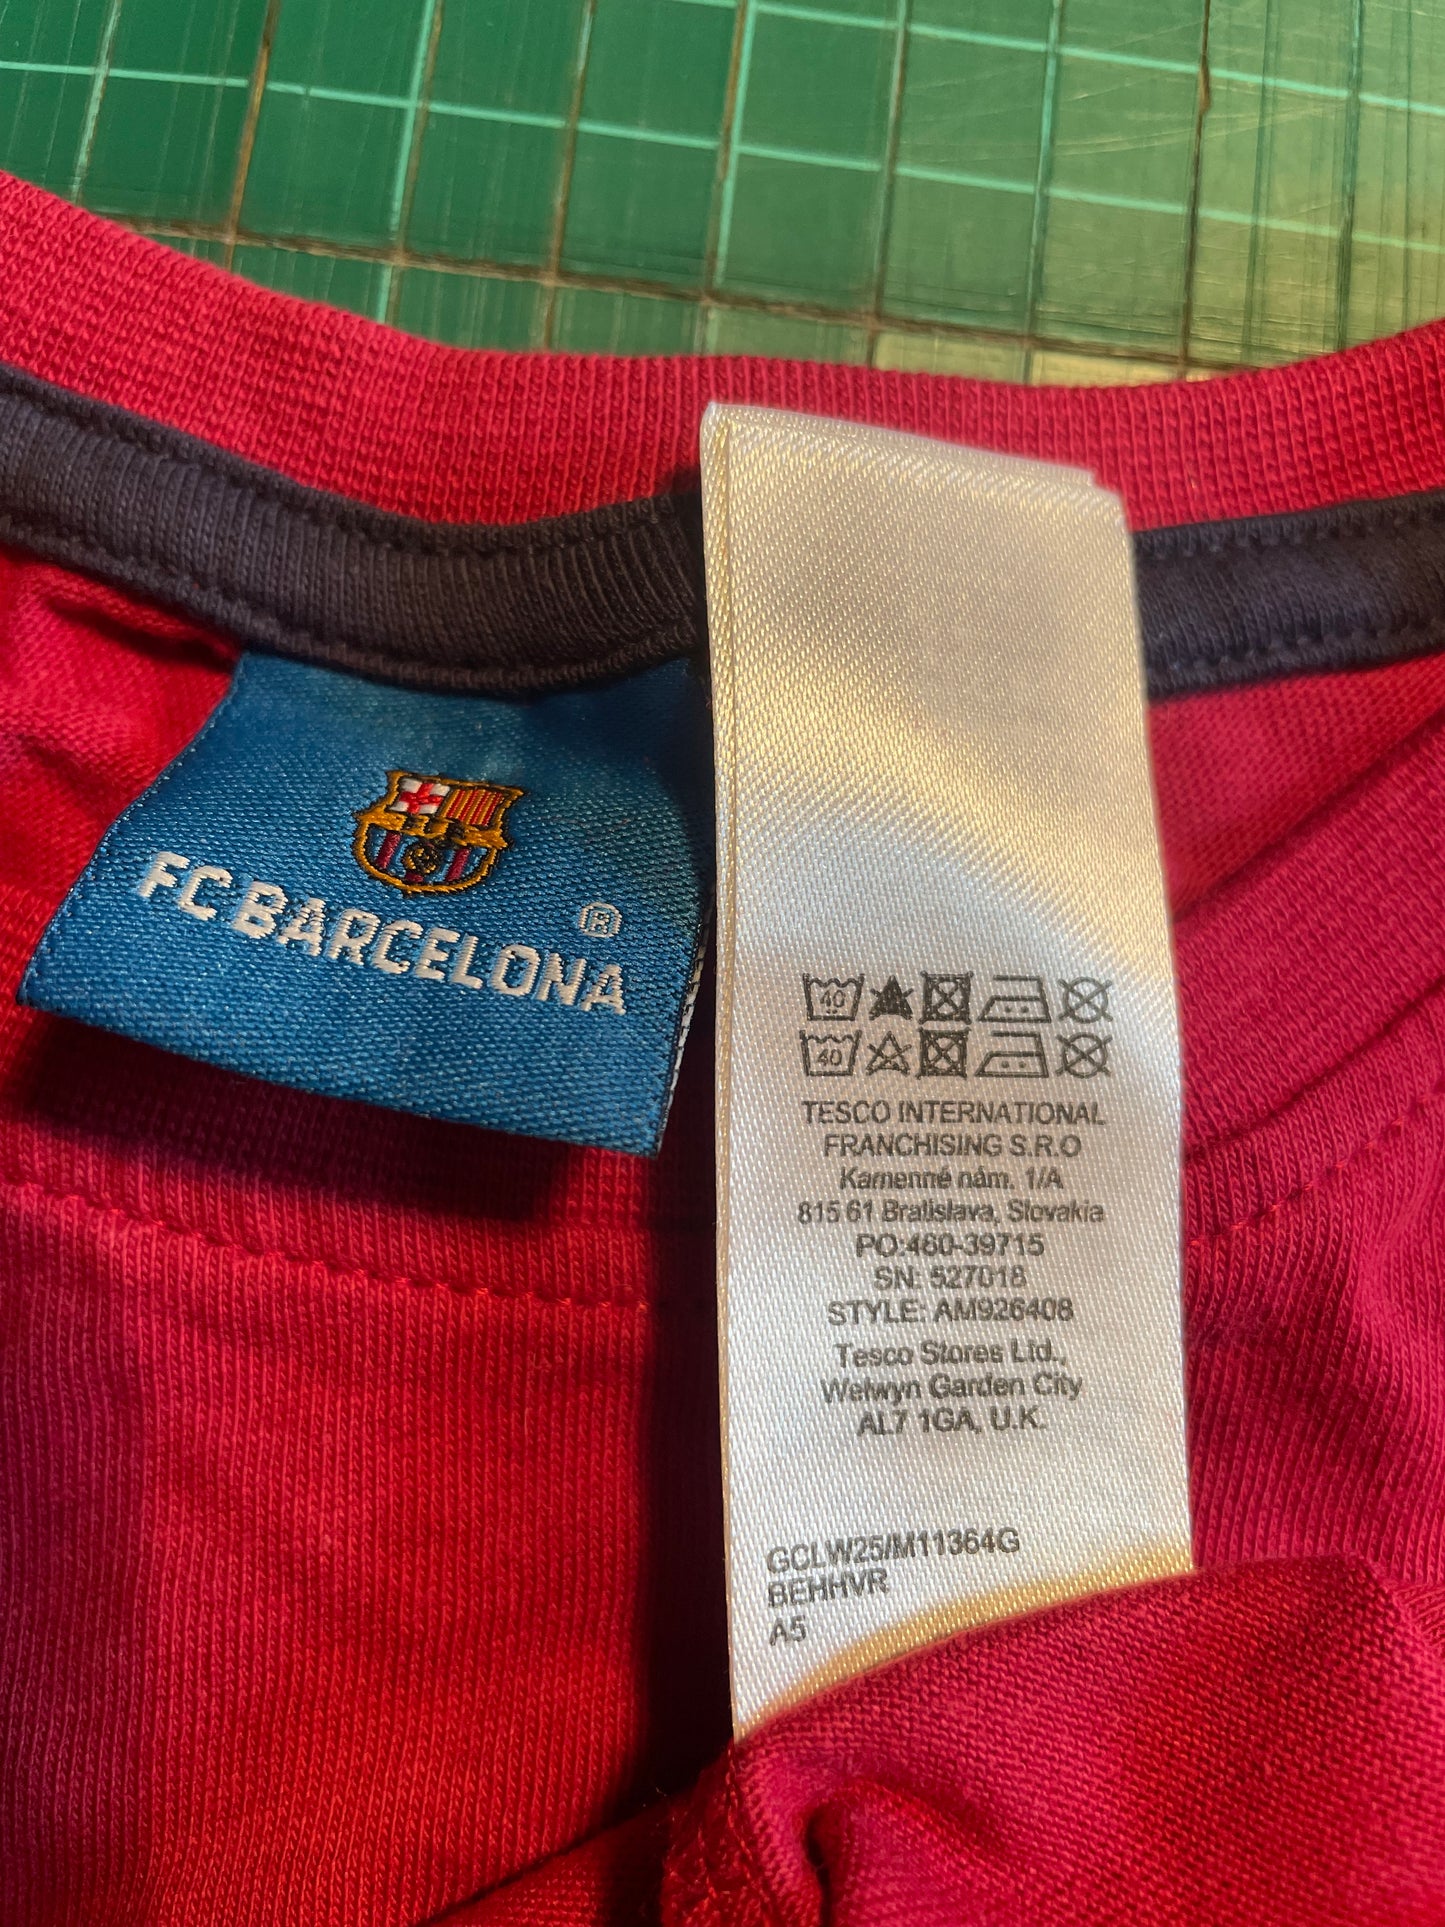 Barcelona Fan Top (excellent) Adults XS/Youths age 13 to 14 years. Height 21 inches